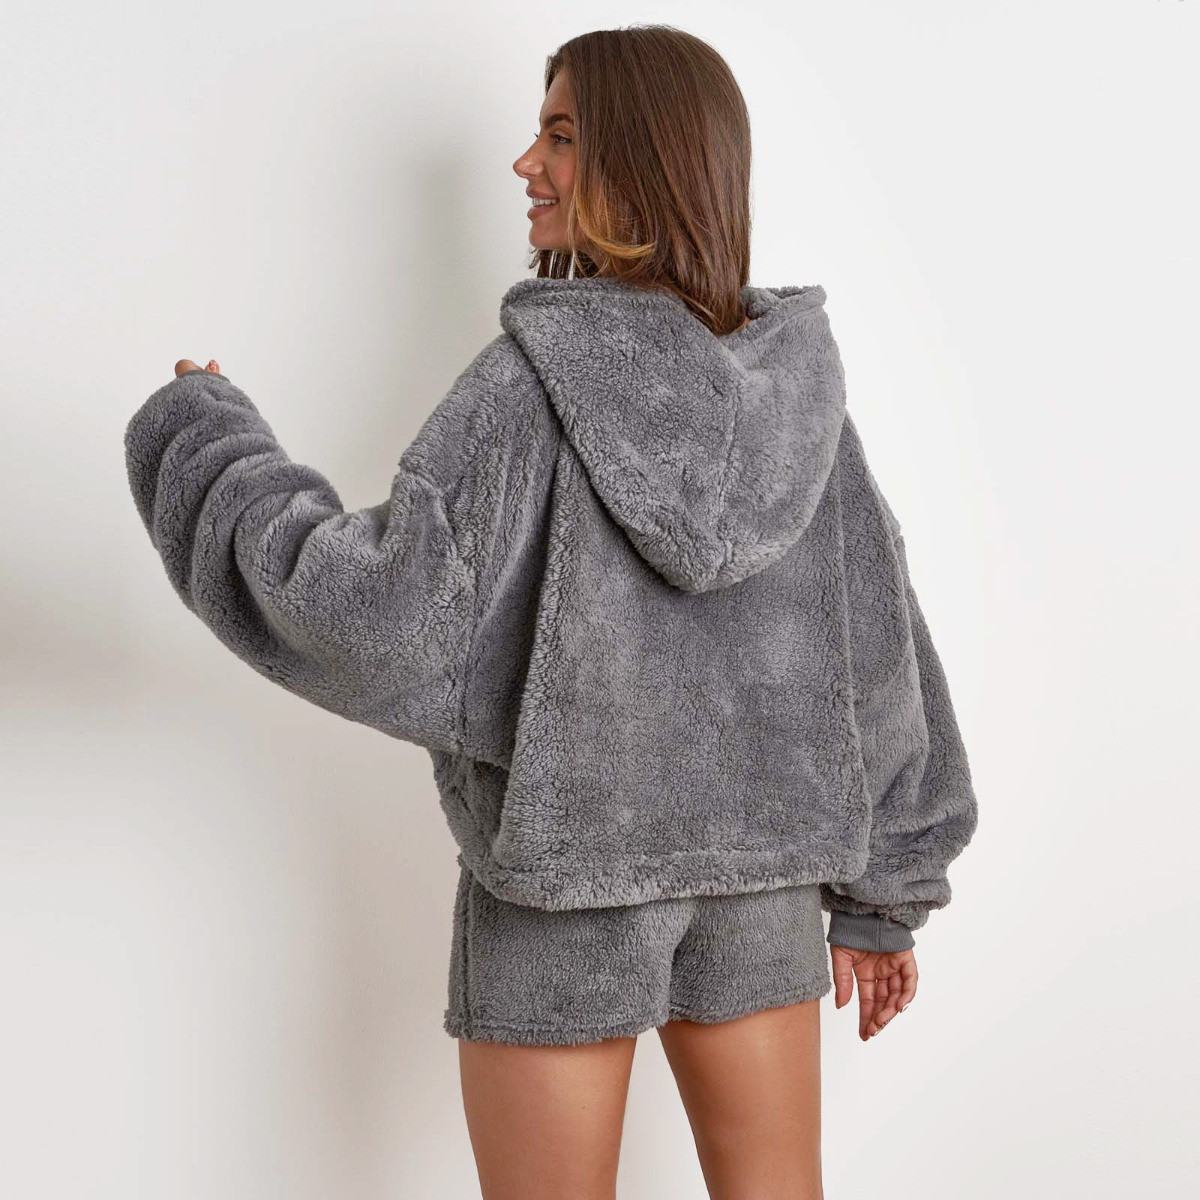 Brentfords Cropped Teddy Fleece Hoodie, One Size - Charcoal>